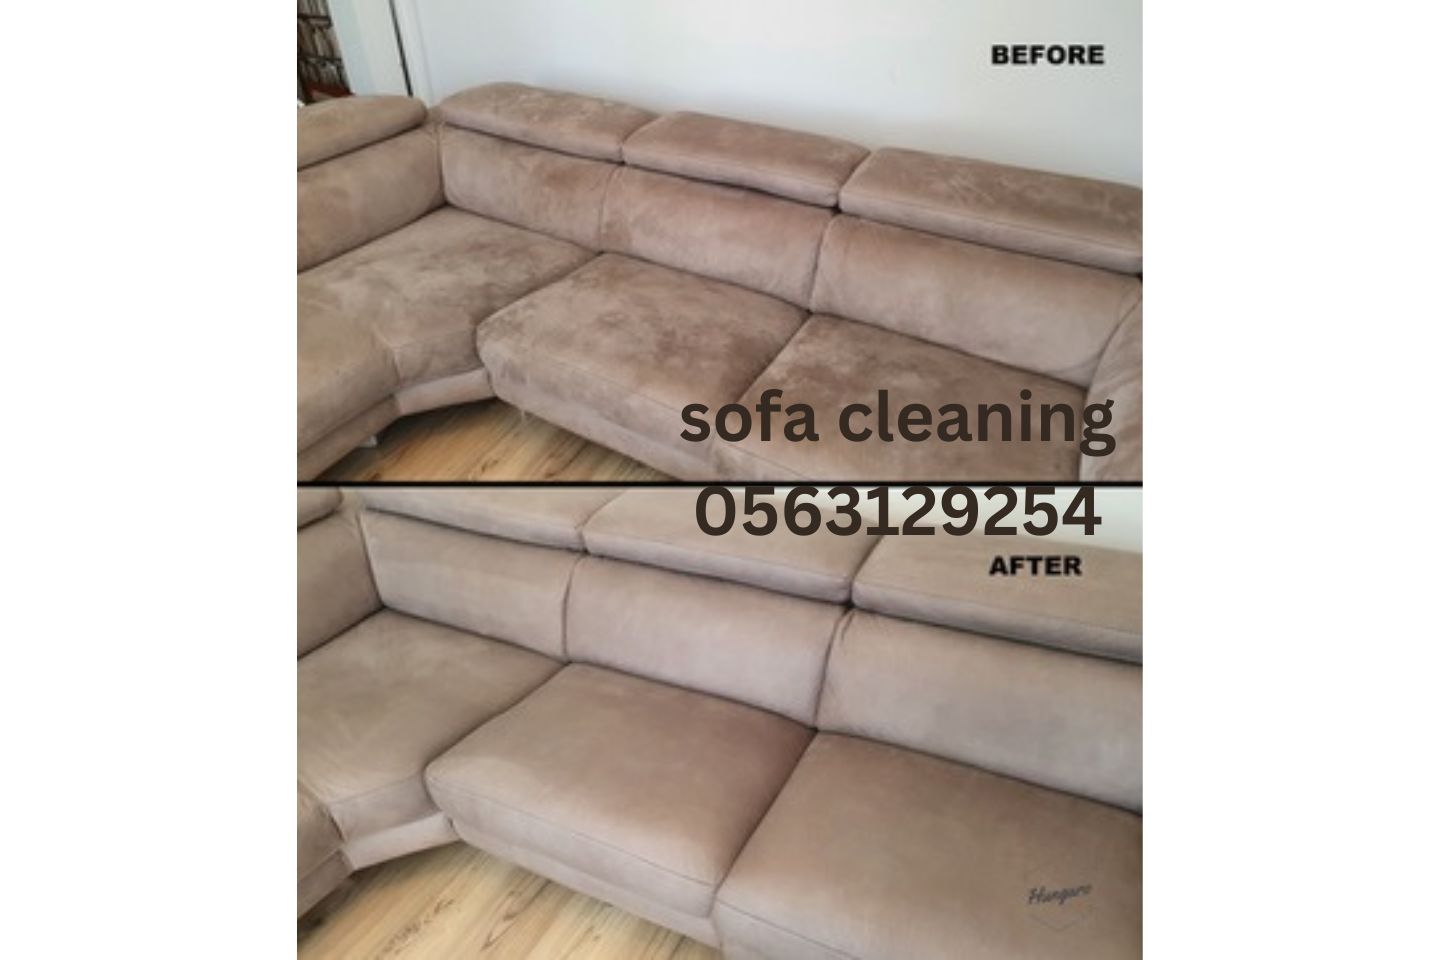 Sofa Cleaning Service In Sharjah 0563129254 Furniture Cleaners Near Me